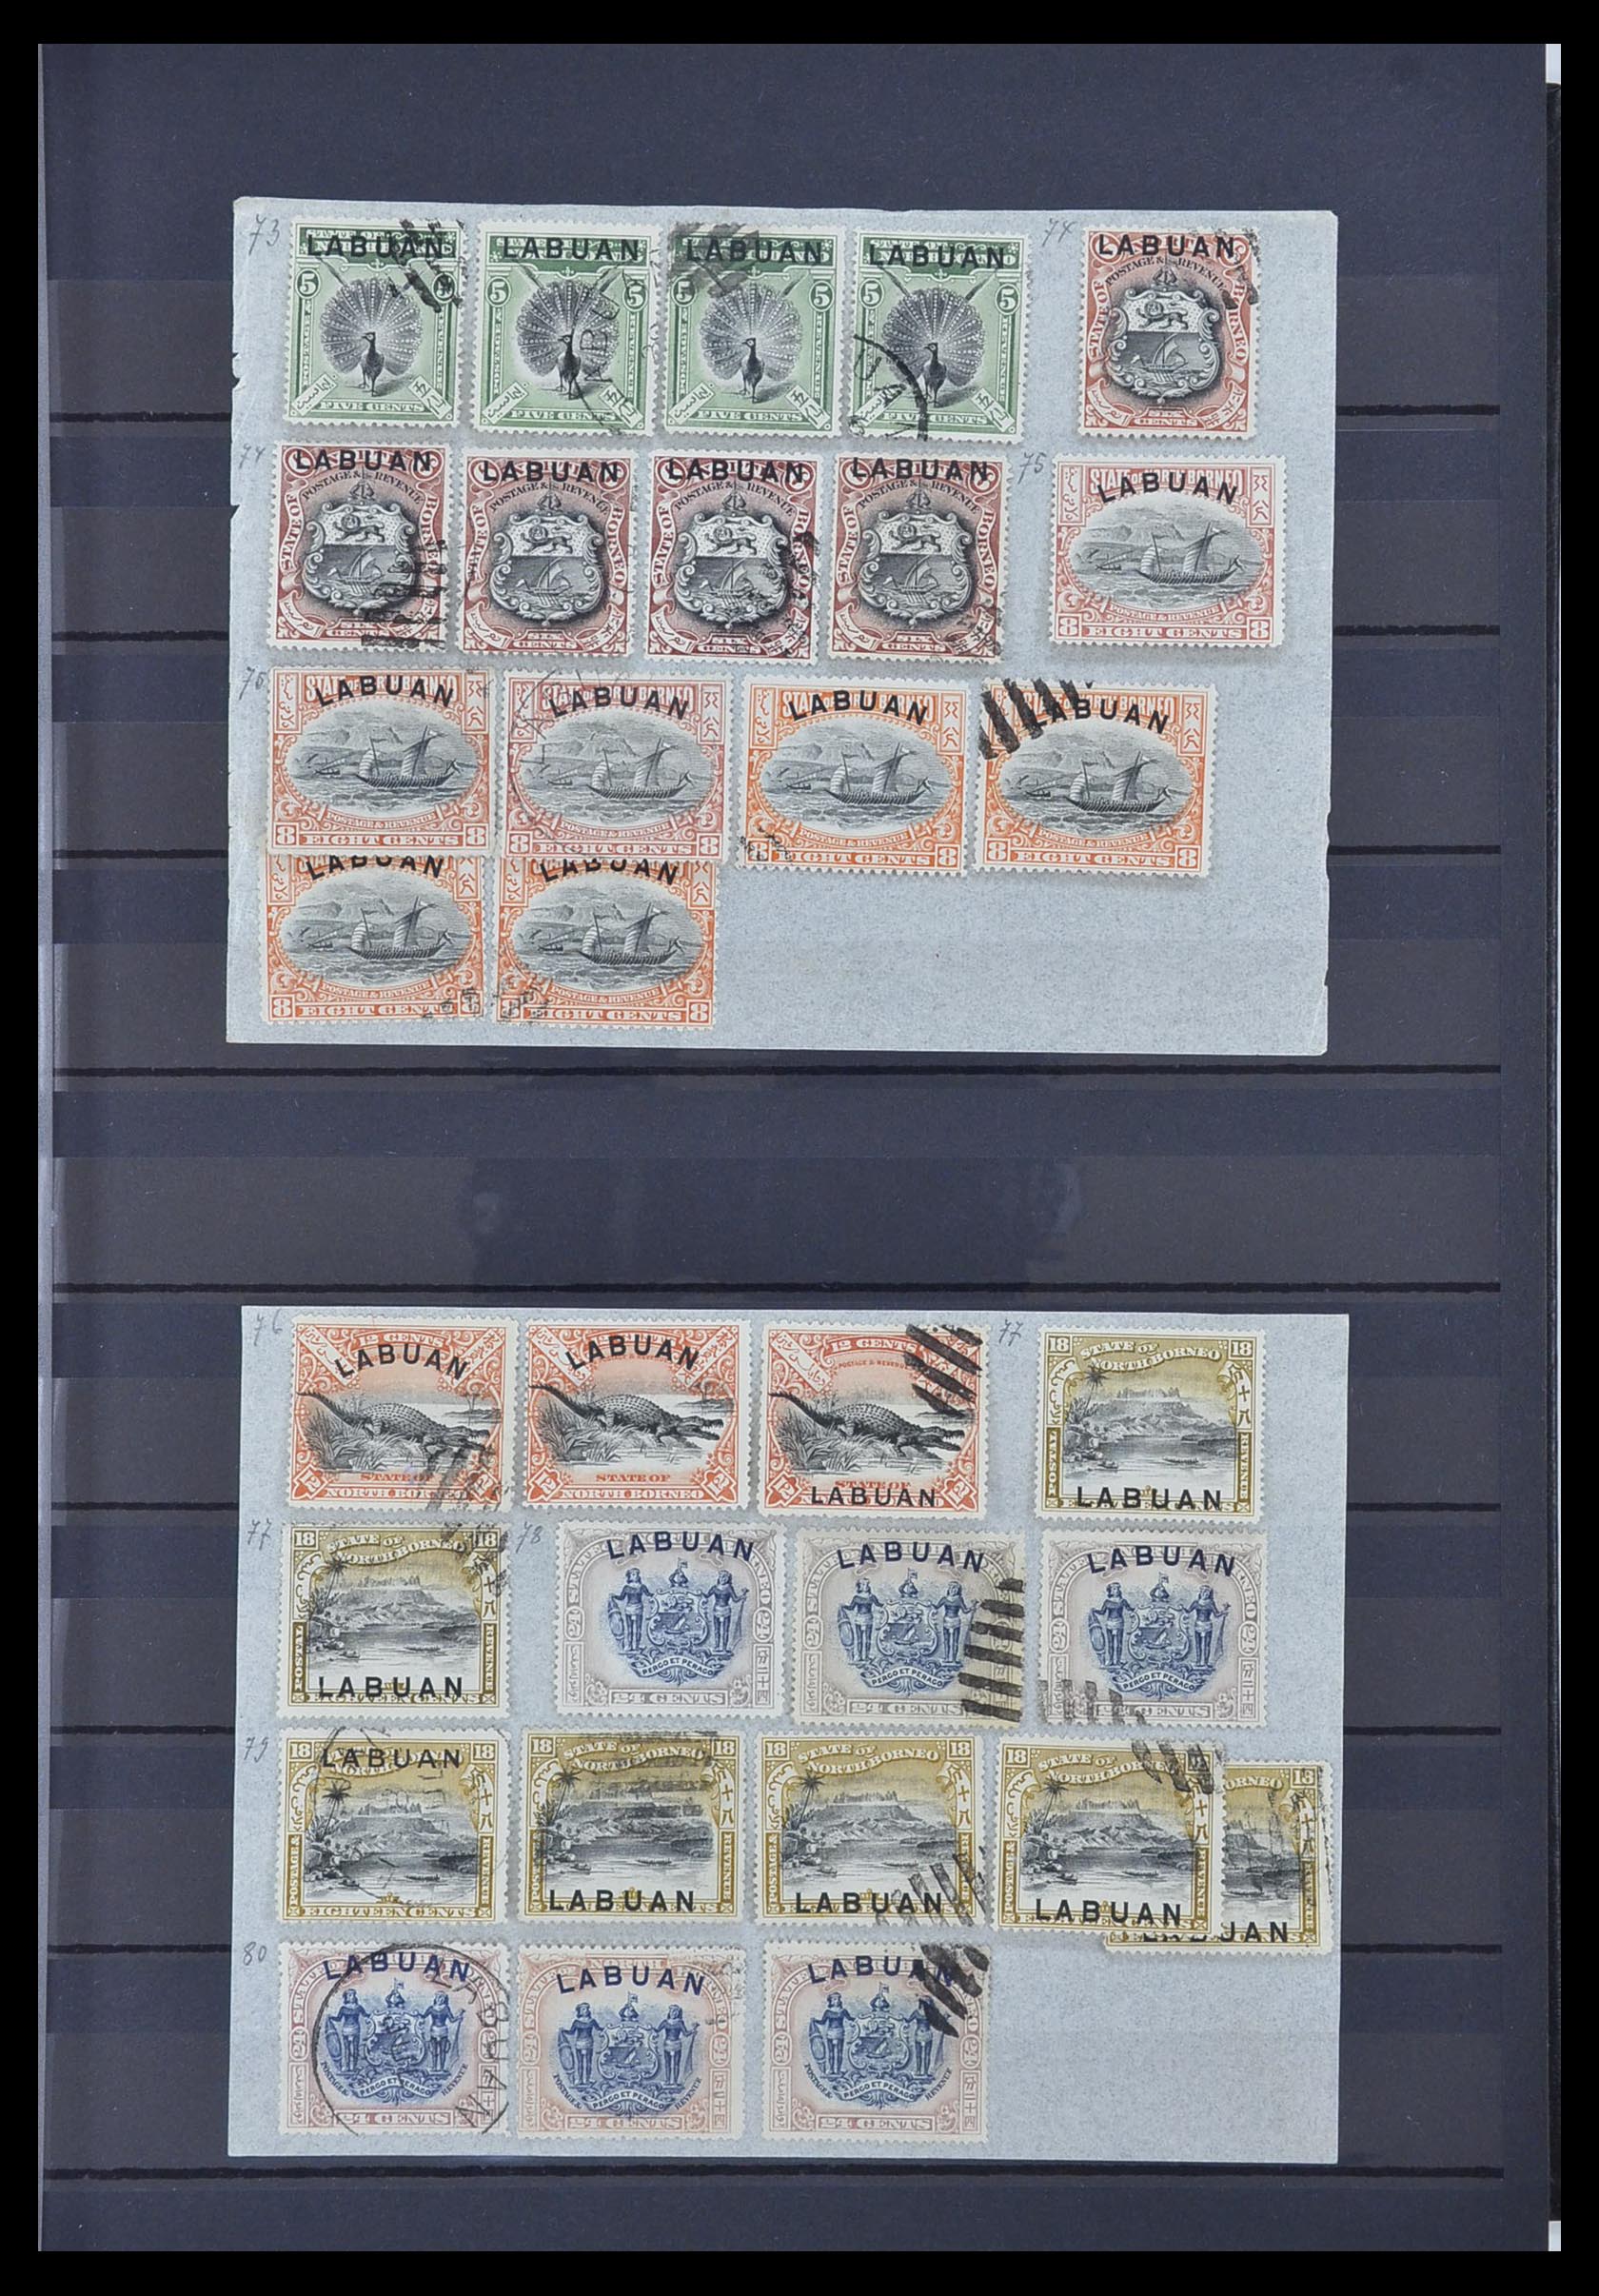 33960 019 - Stamp collection 33960 British colonies classic 1850-1920.